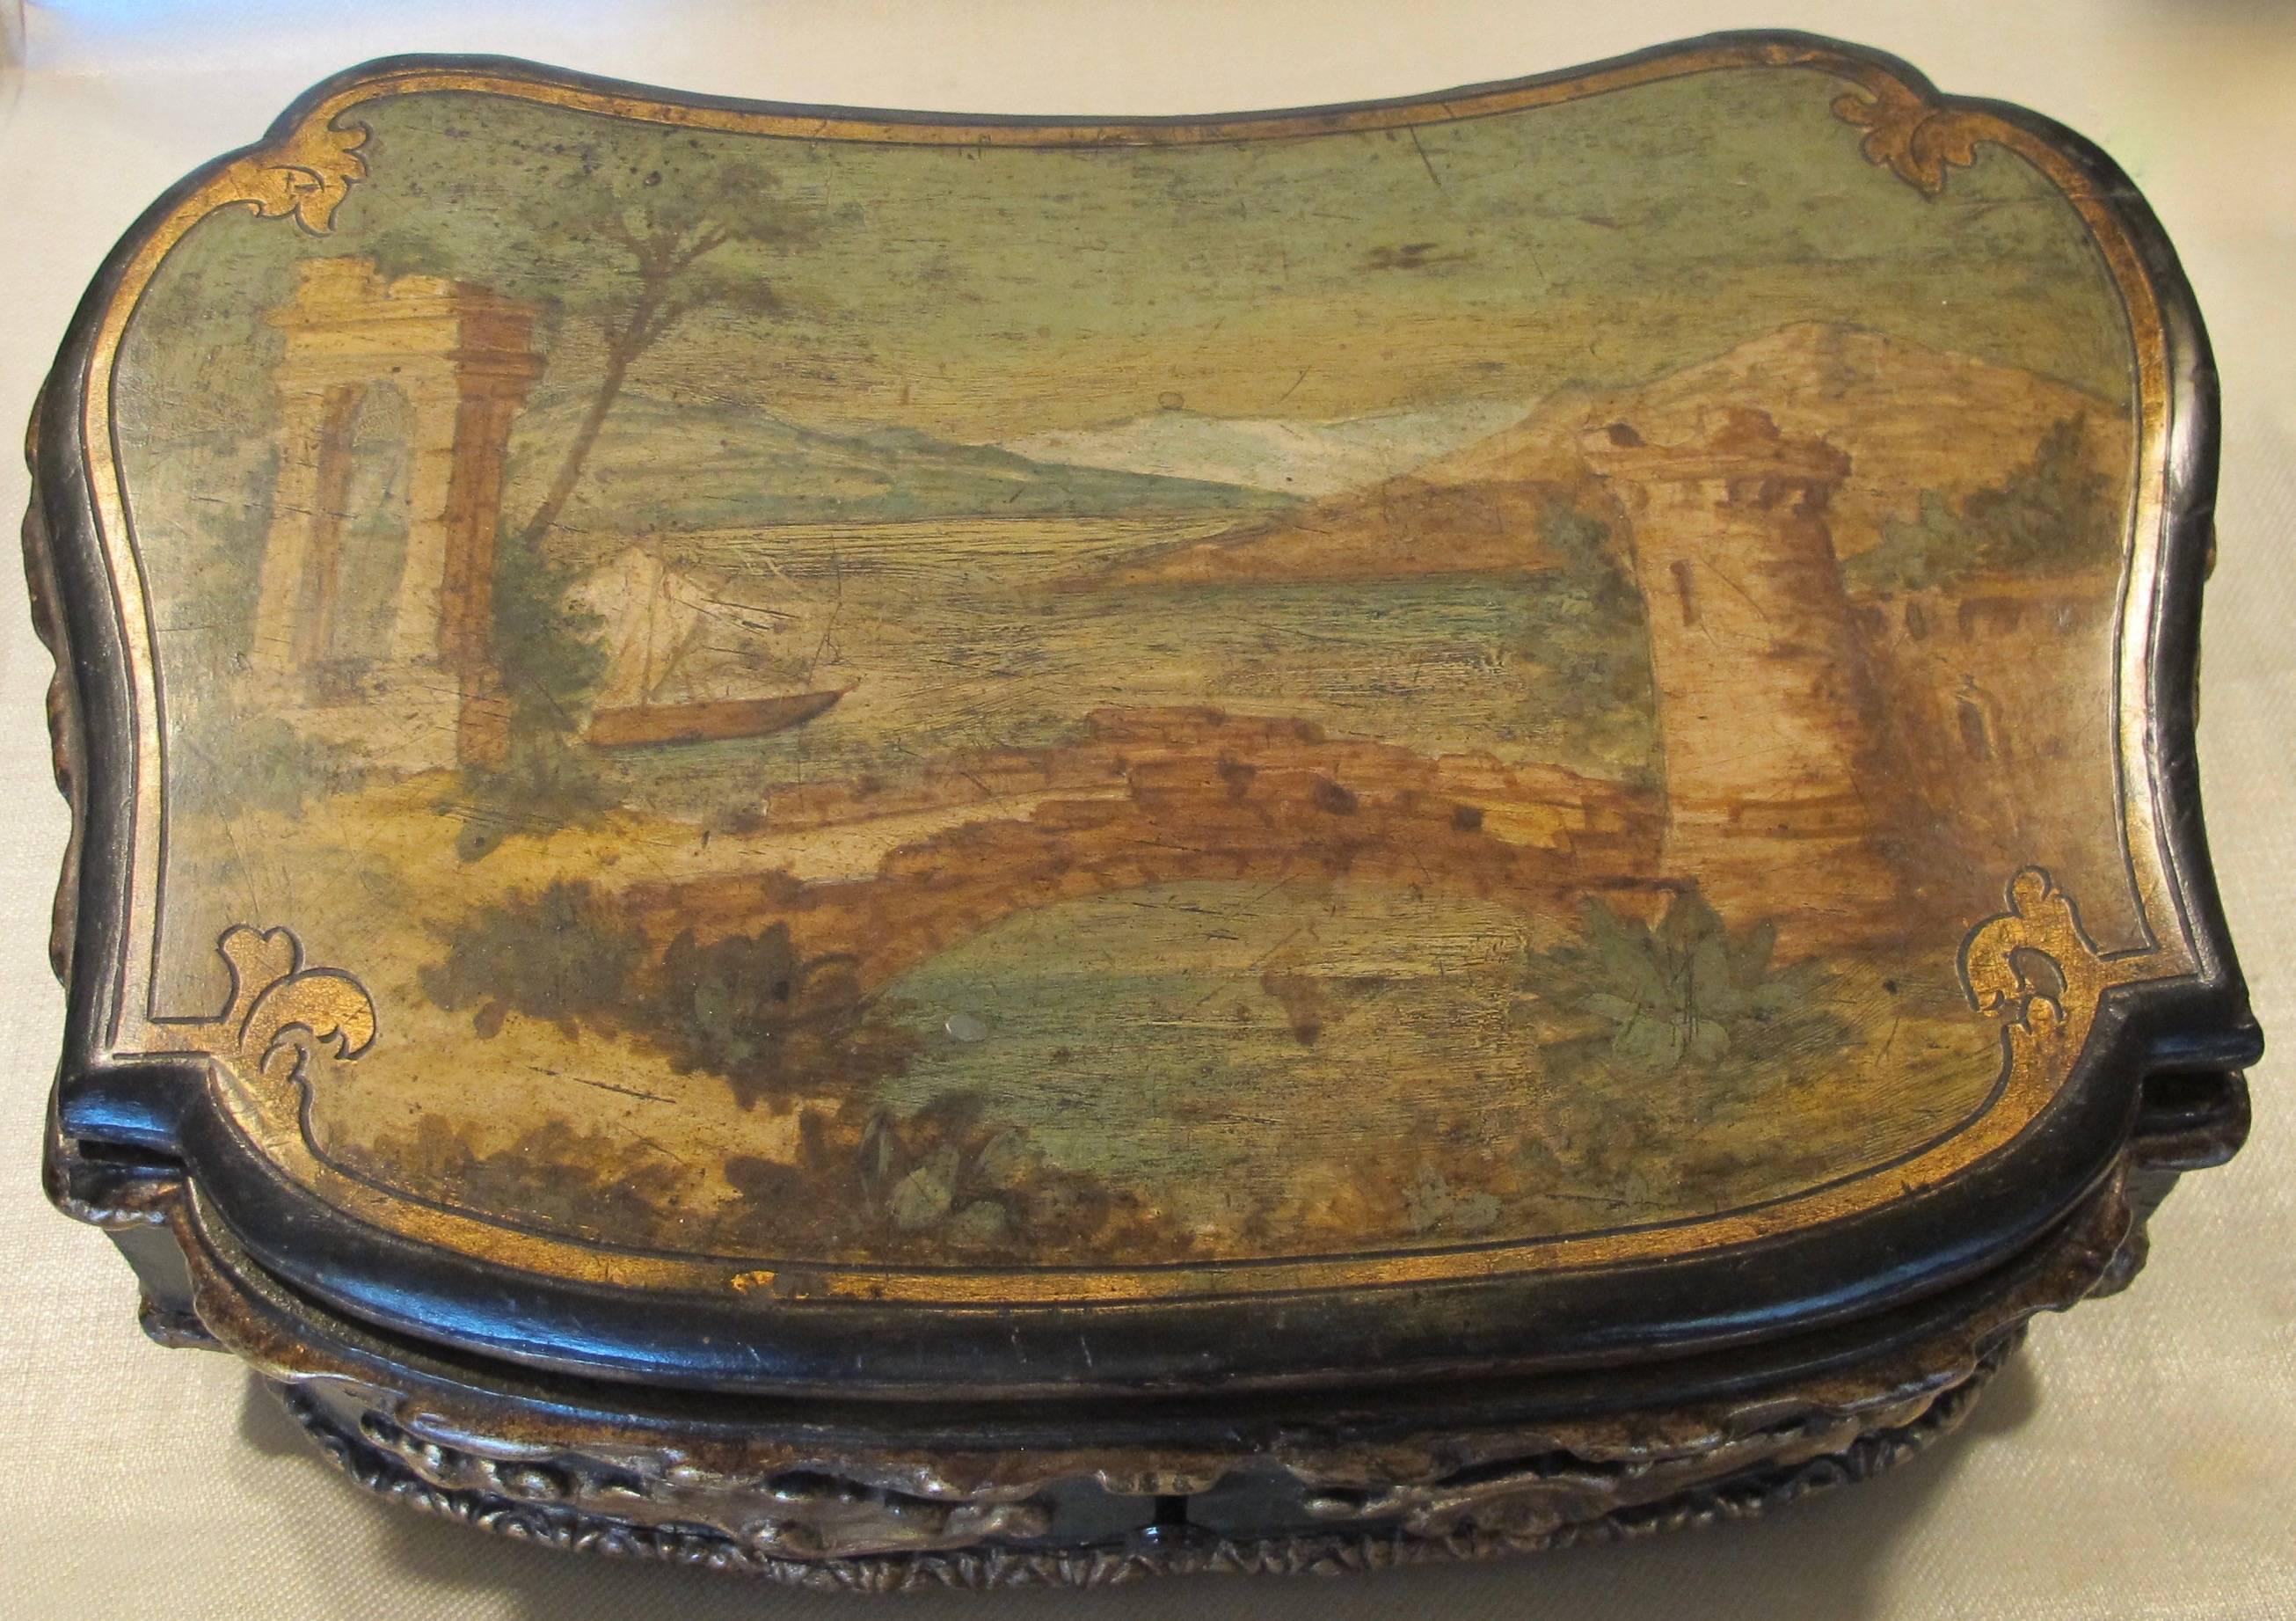 Découpage Hand-Painted and Decoupage Shaped Box, 18th Century